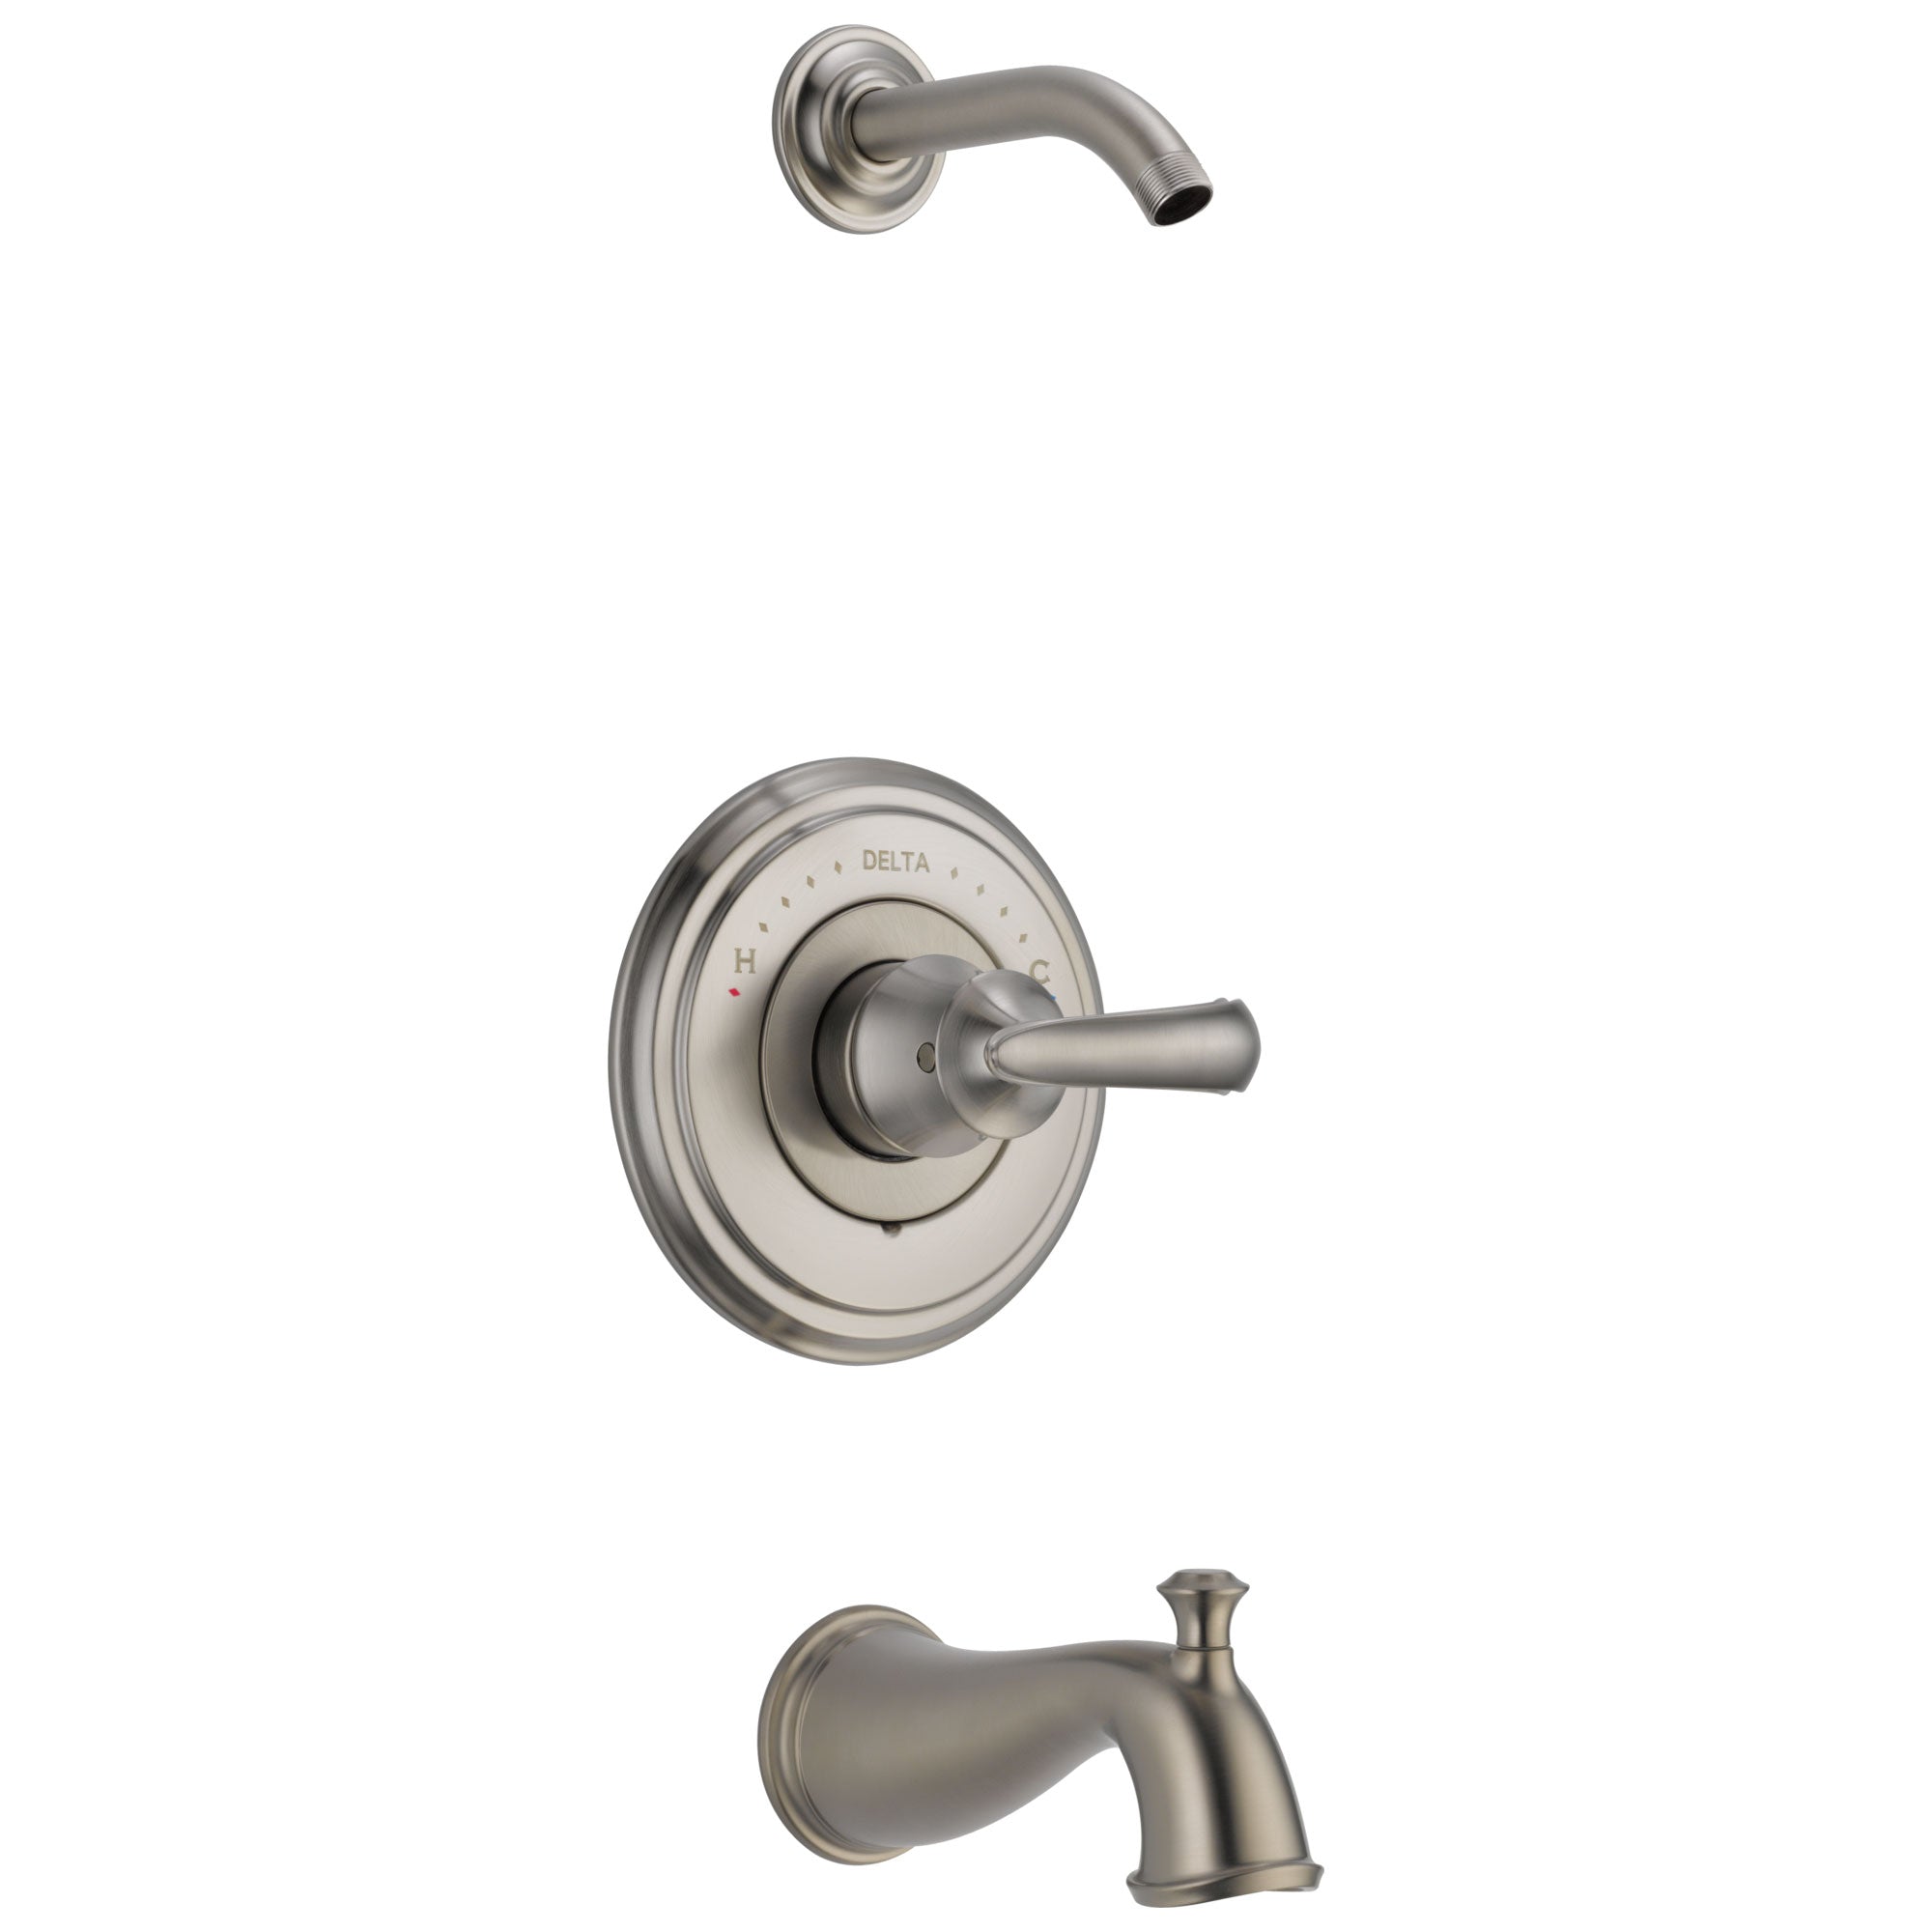 Delta Cassidy Stainless Steel Finish Tub and Shower Combination - Less Showerhead INCLUDES Single French Curve Lever Handle and Valve without Stops D1816V